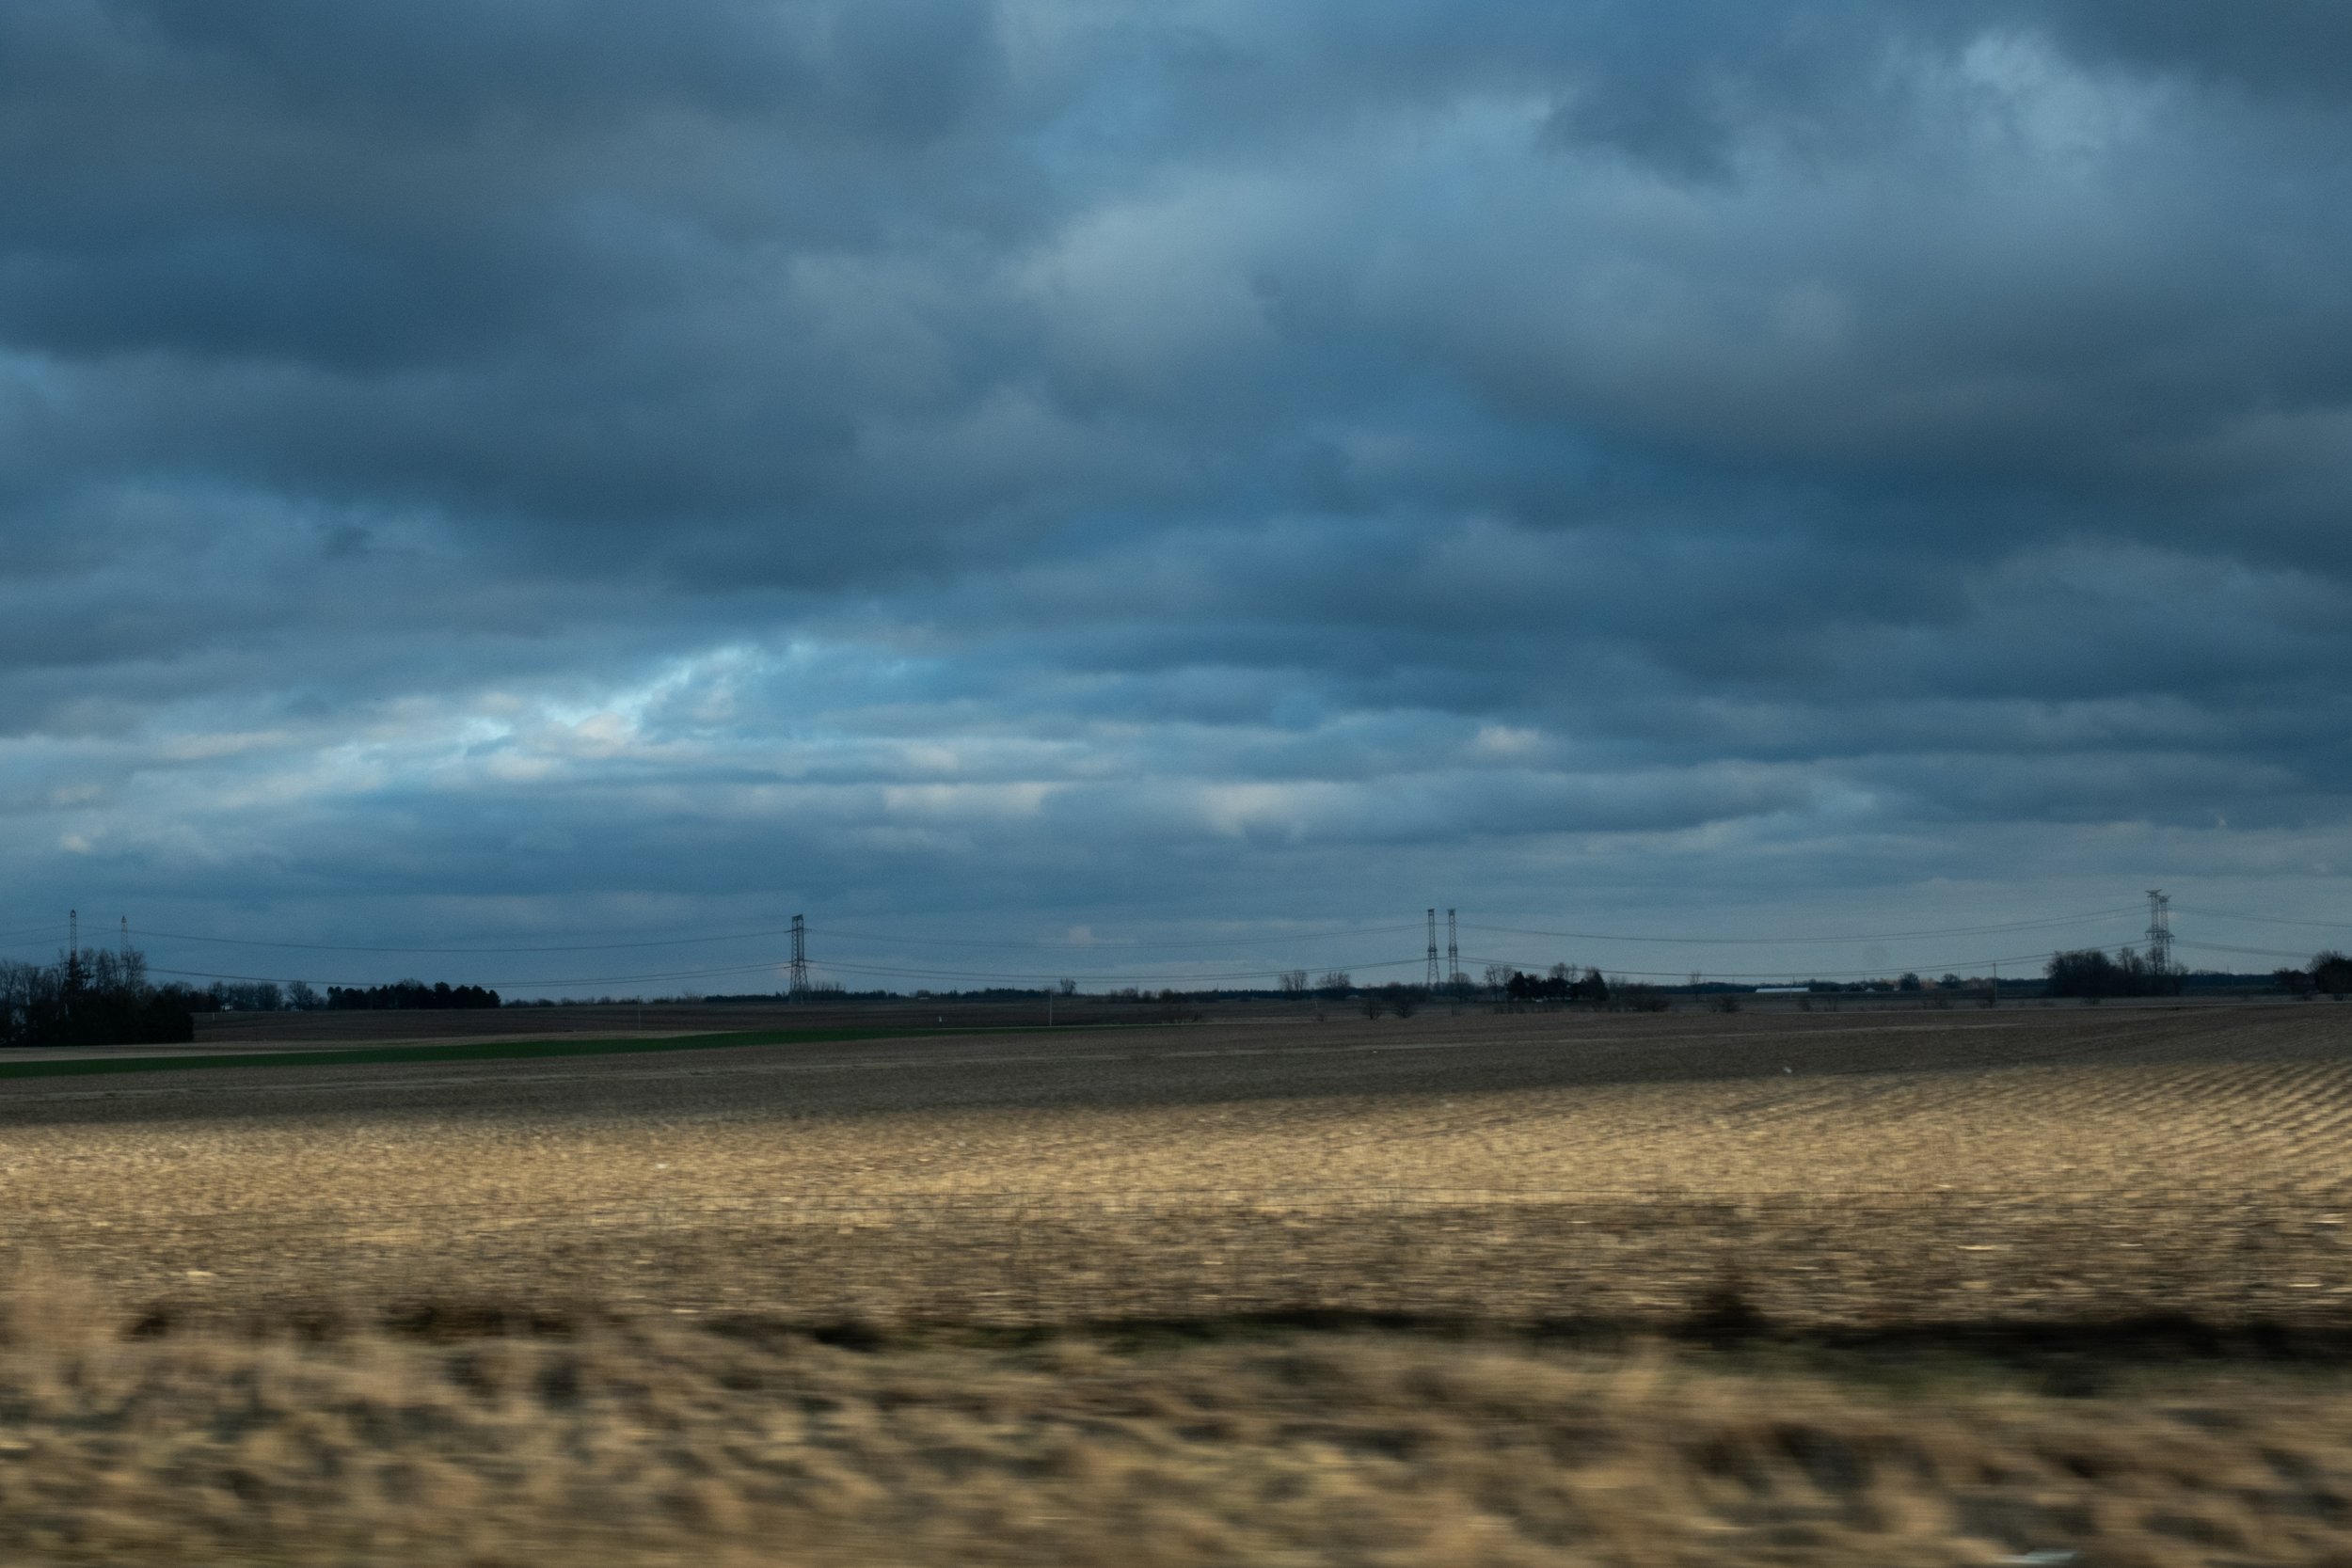  Clouds cover the sky in Pekin, Illinois on April 3, 2022. Jenny Justice says growing up, she considered her community a pretty decent place, but now she just wants to run from it. She thinks addiction here can be attributed to poverty and mental hea